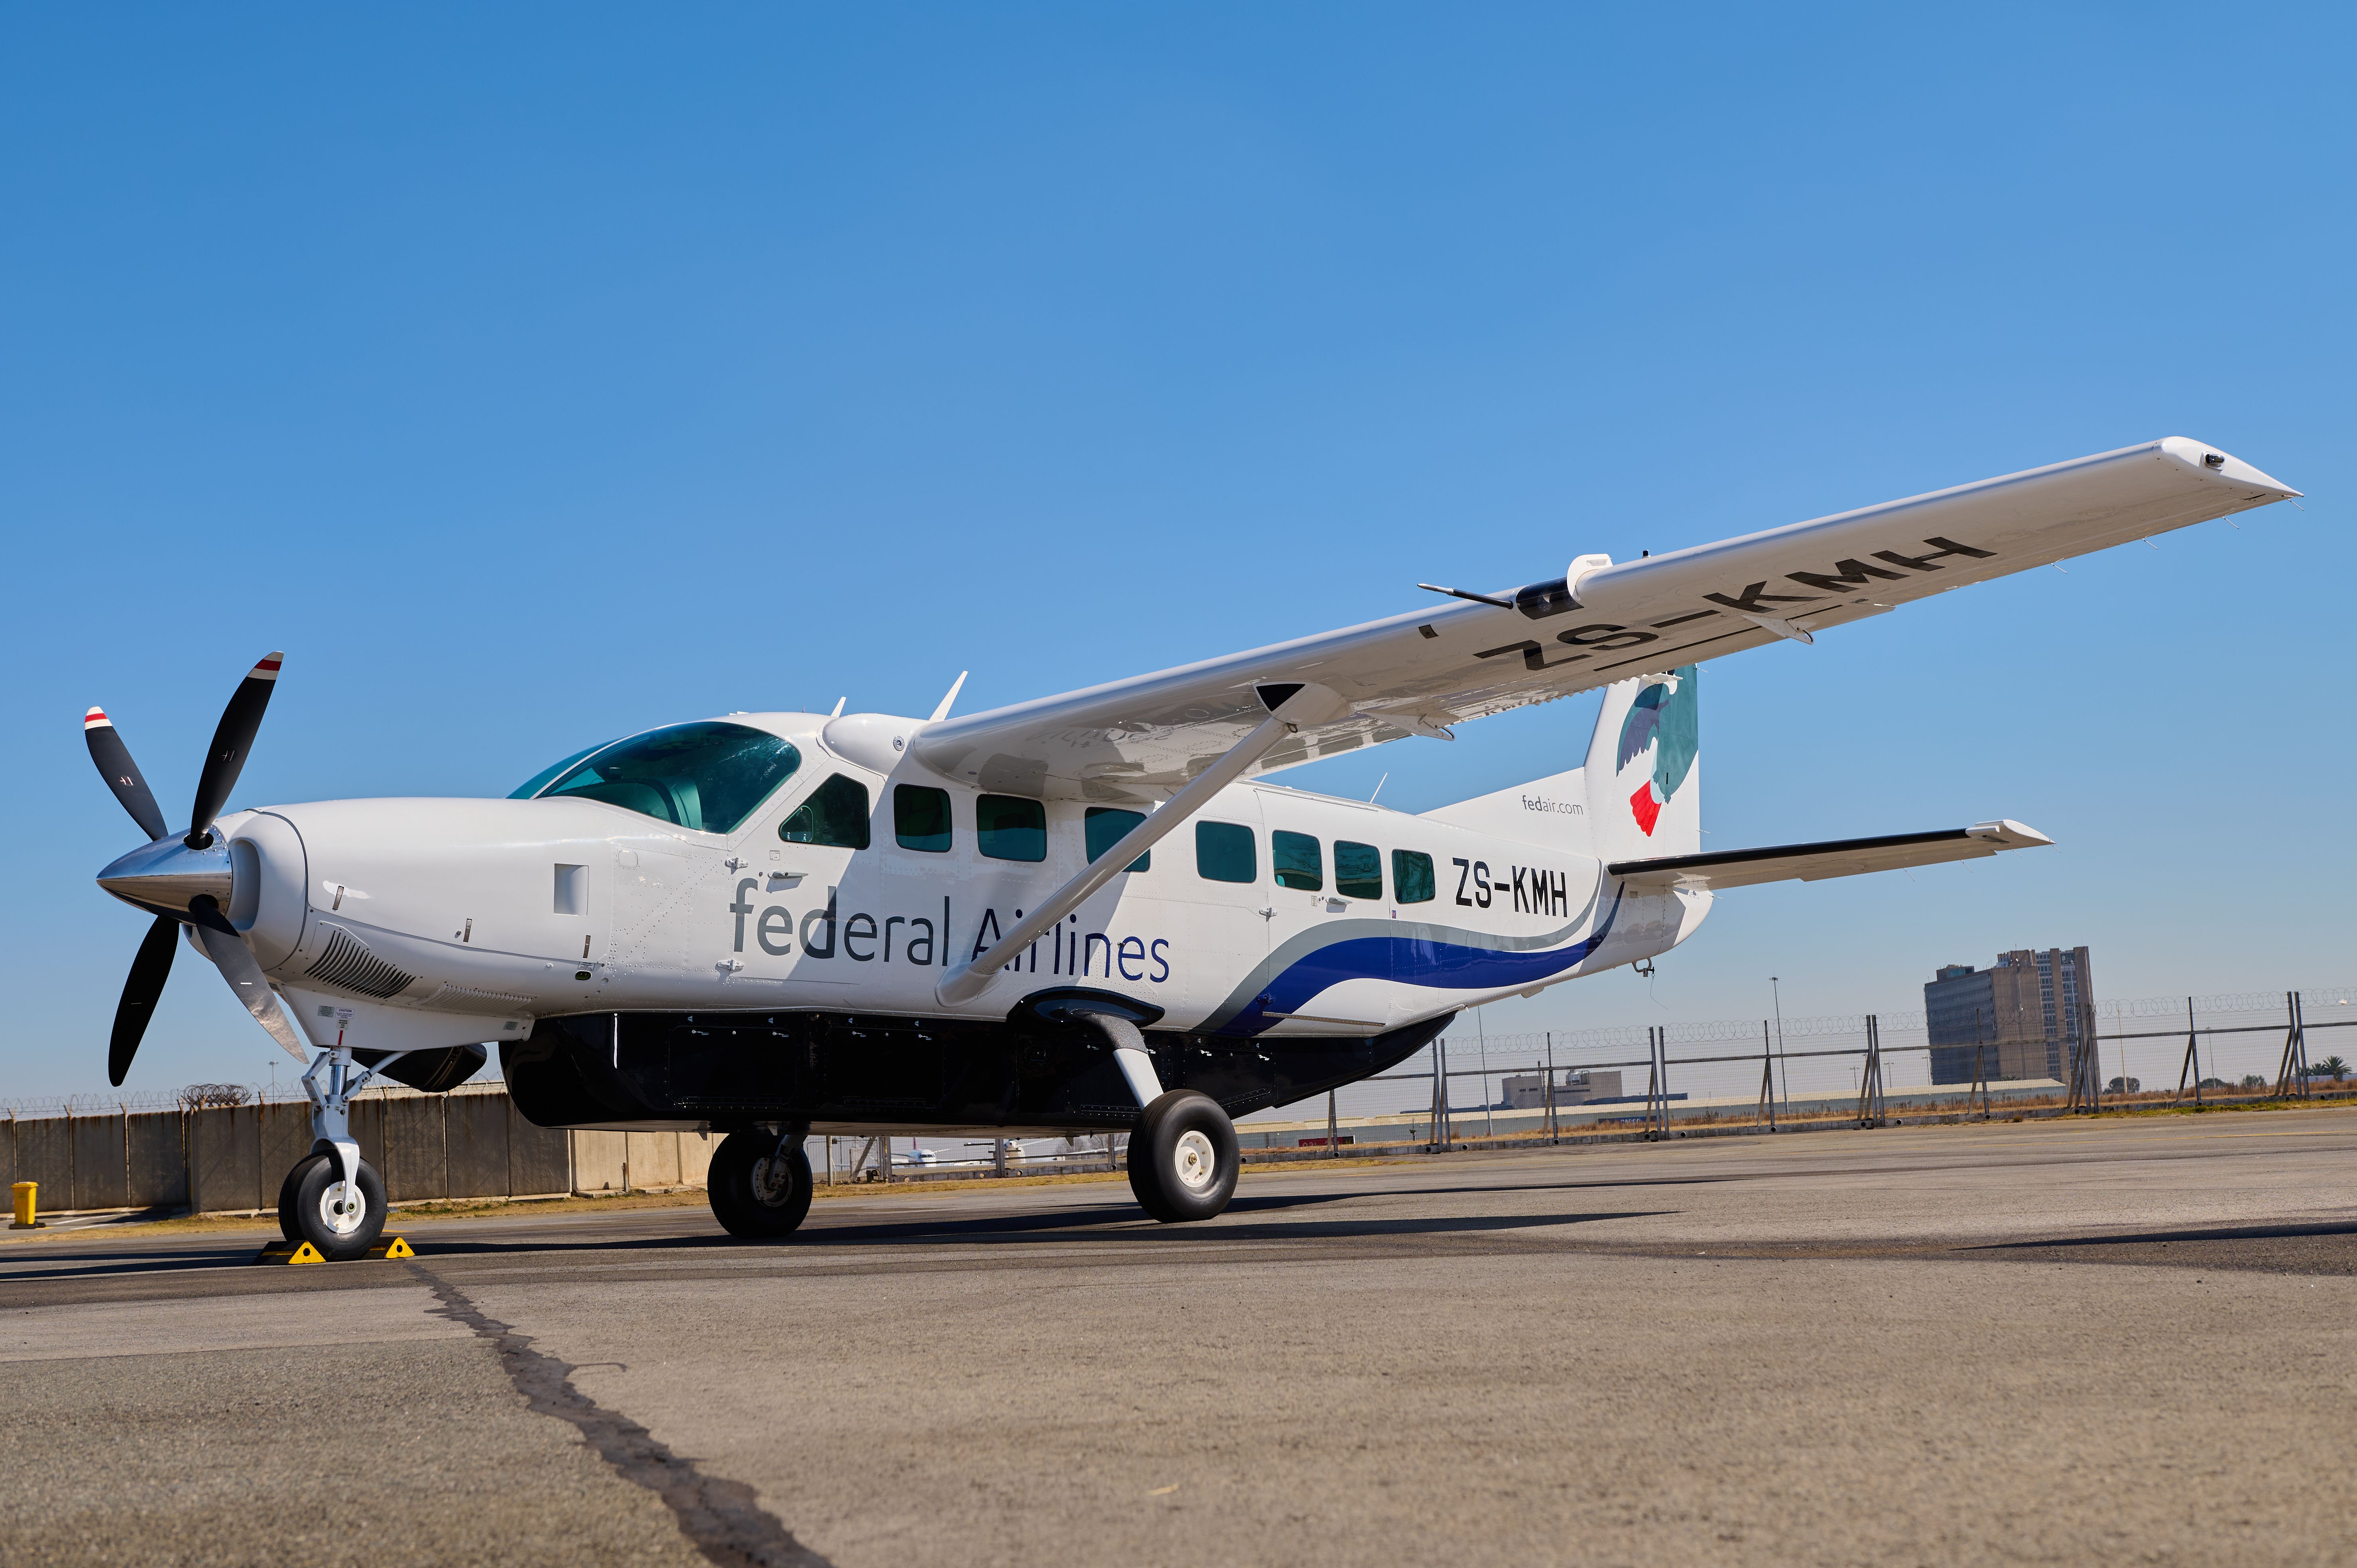 A Federal Airlines Cessna Grand Caravan on an airport apron.